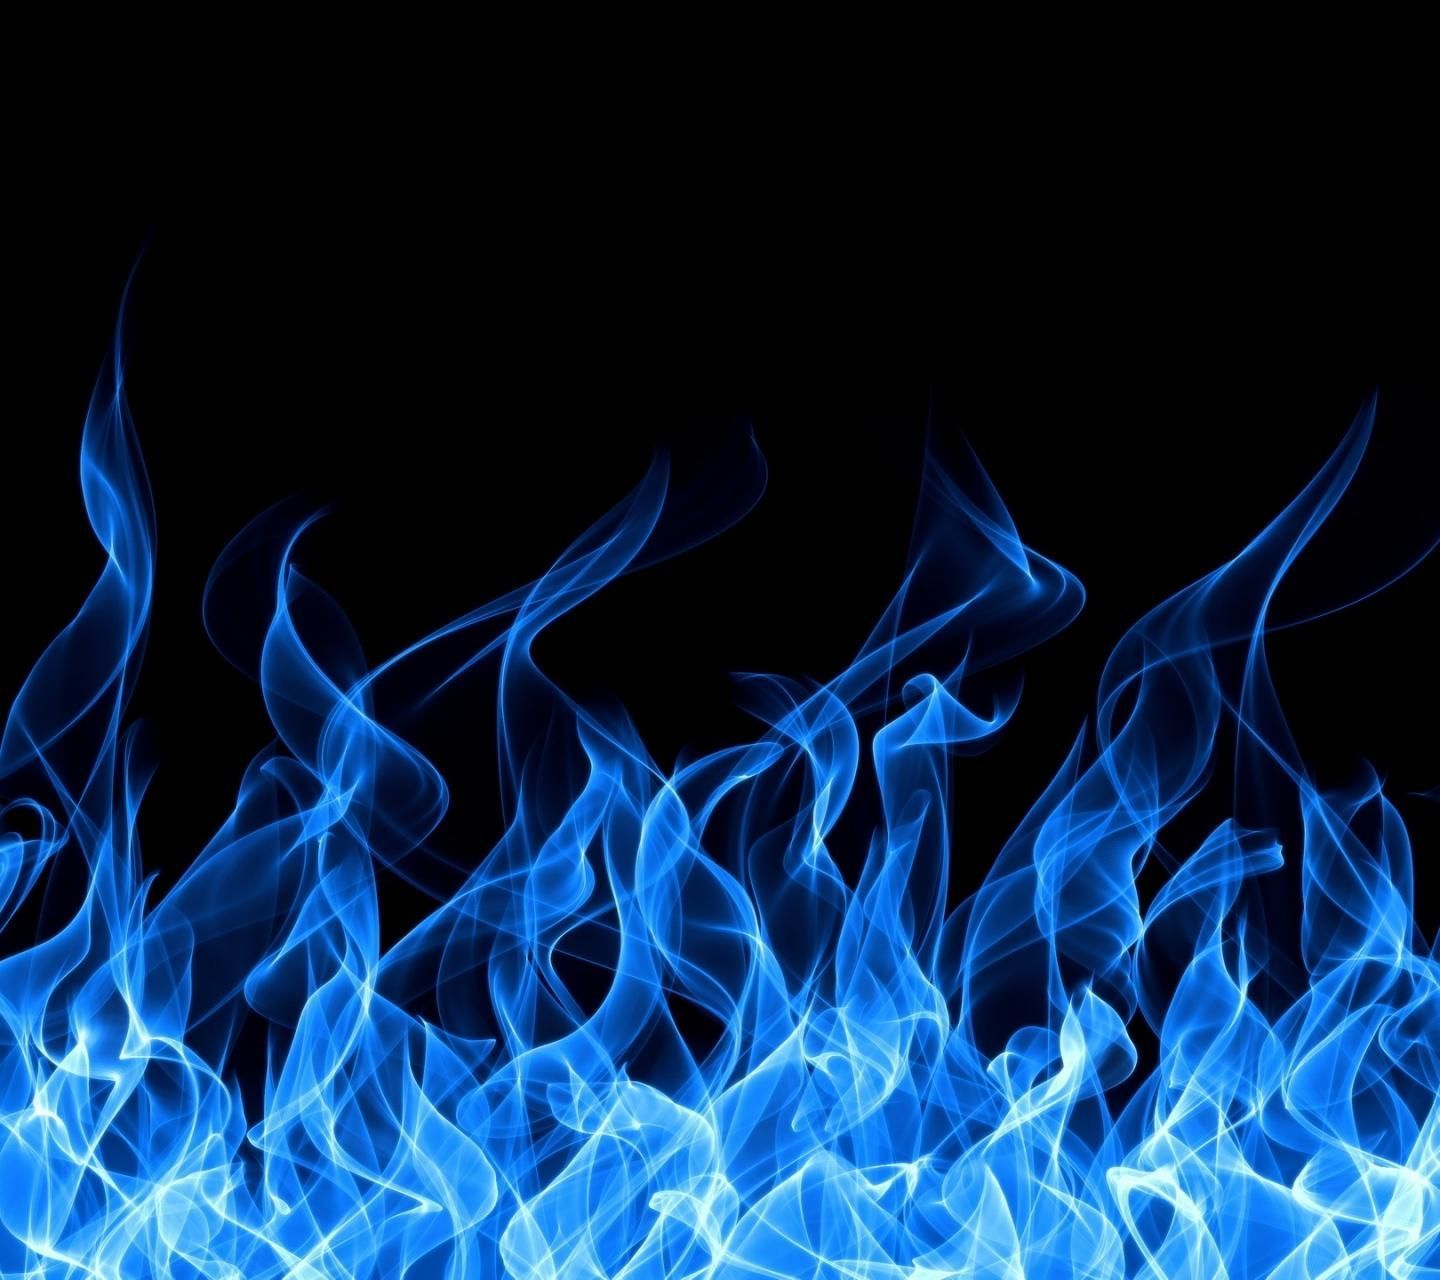 Blue fire flames on a black background - Flames